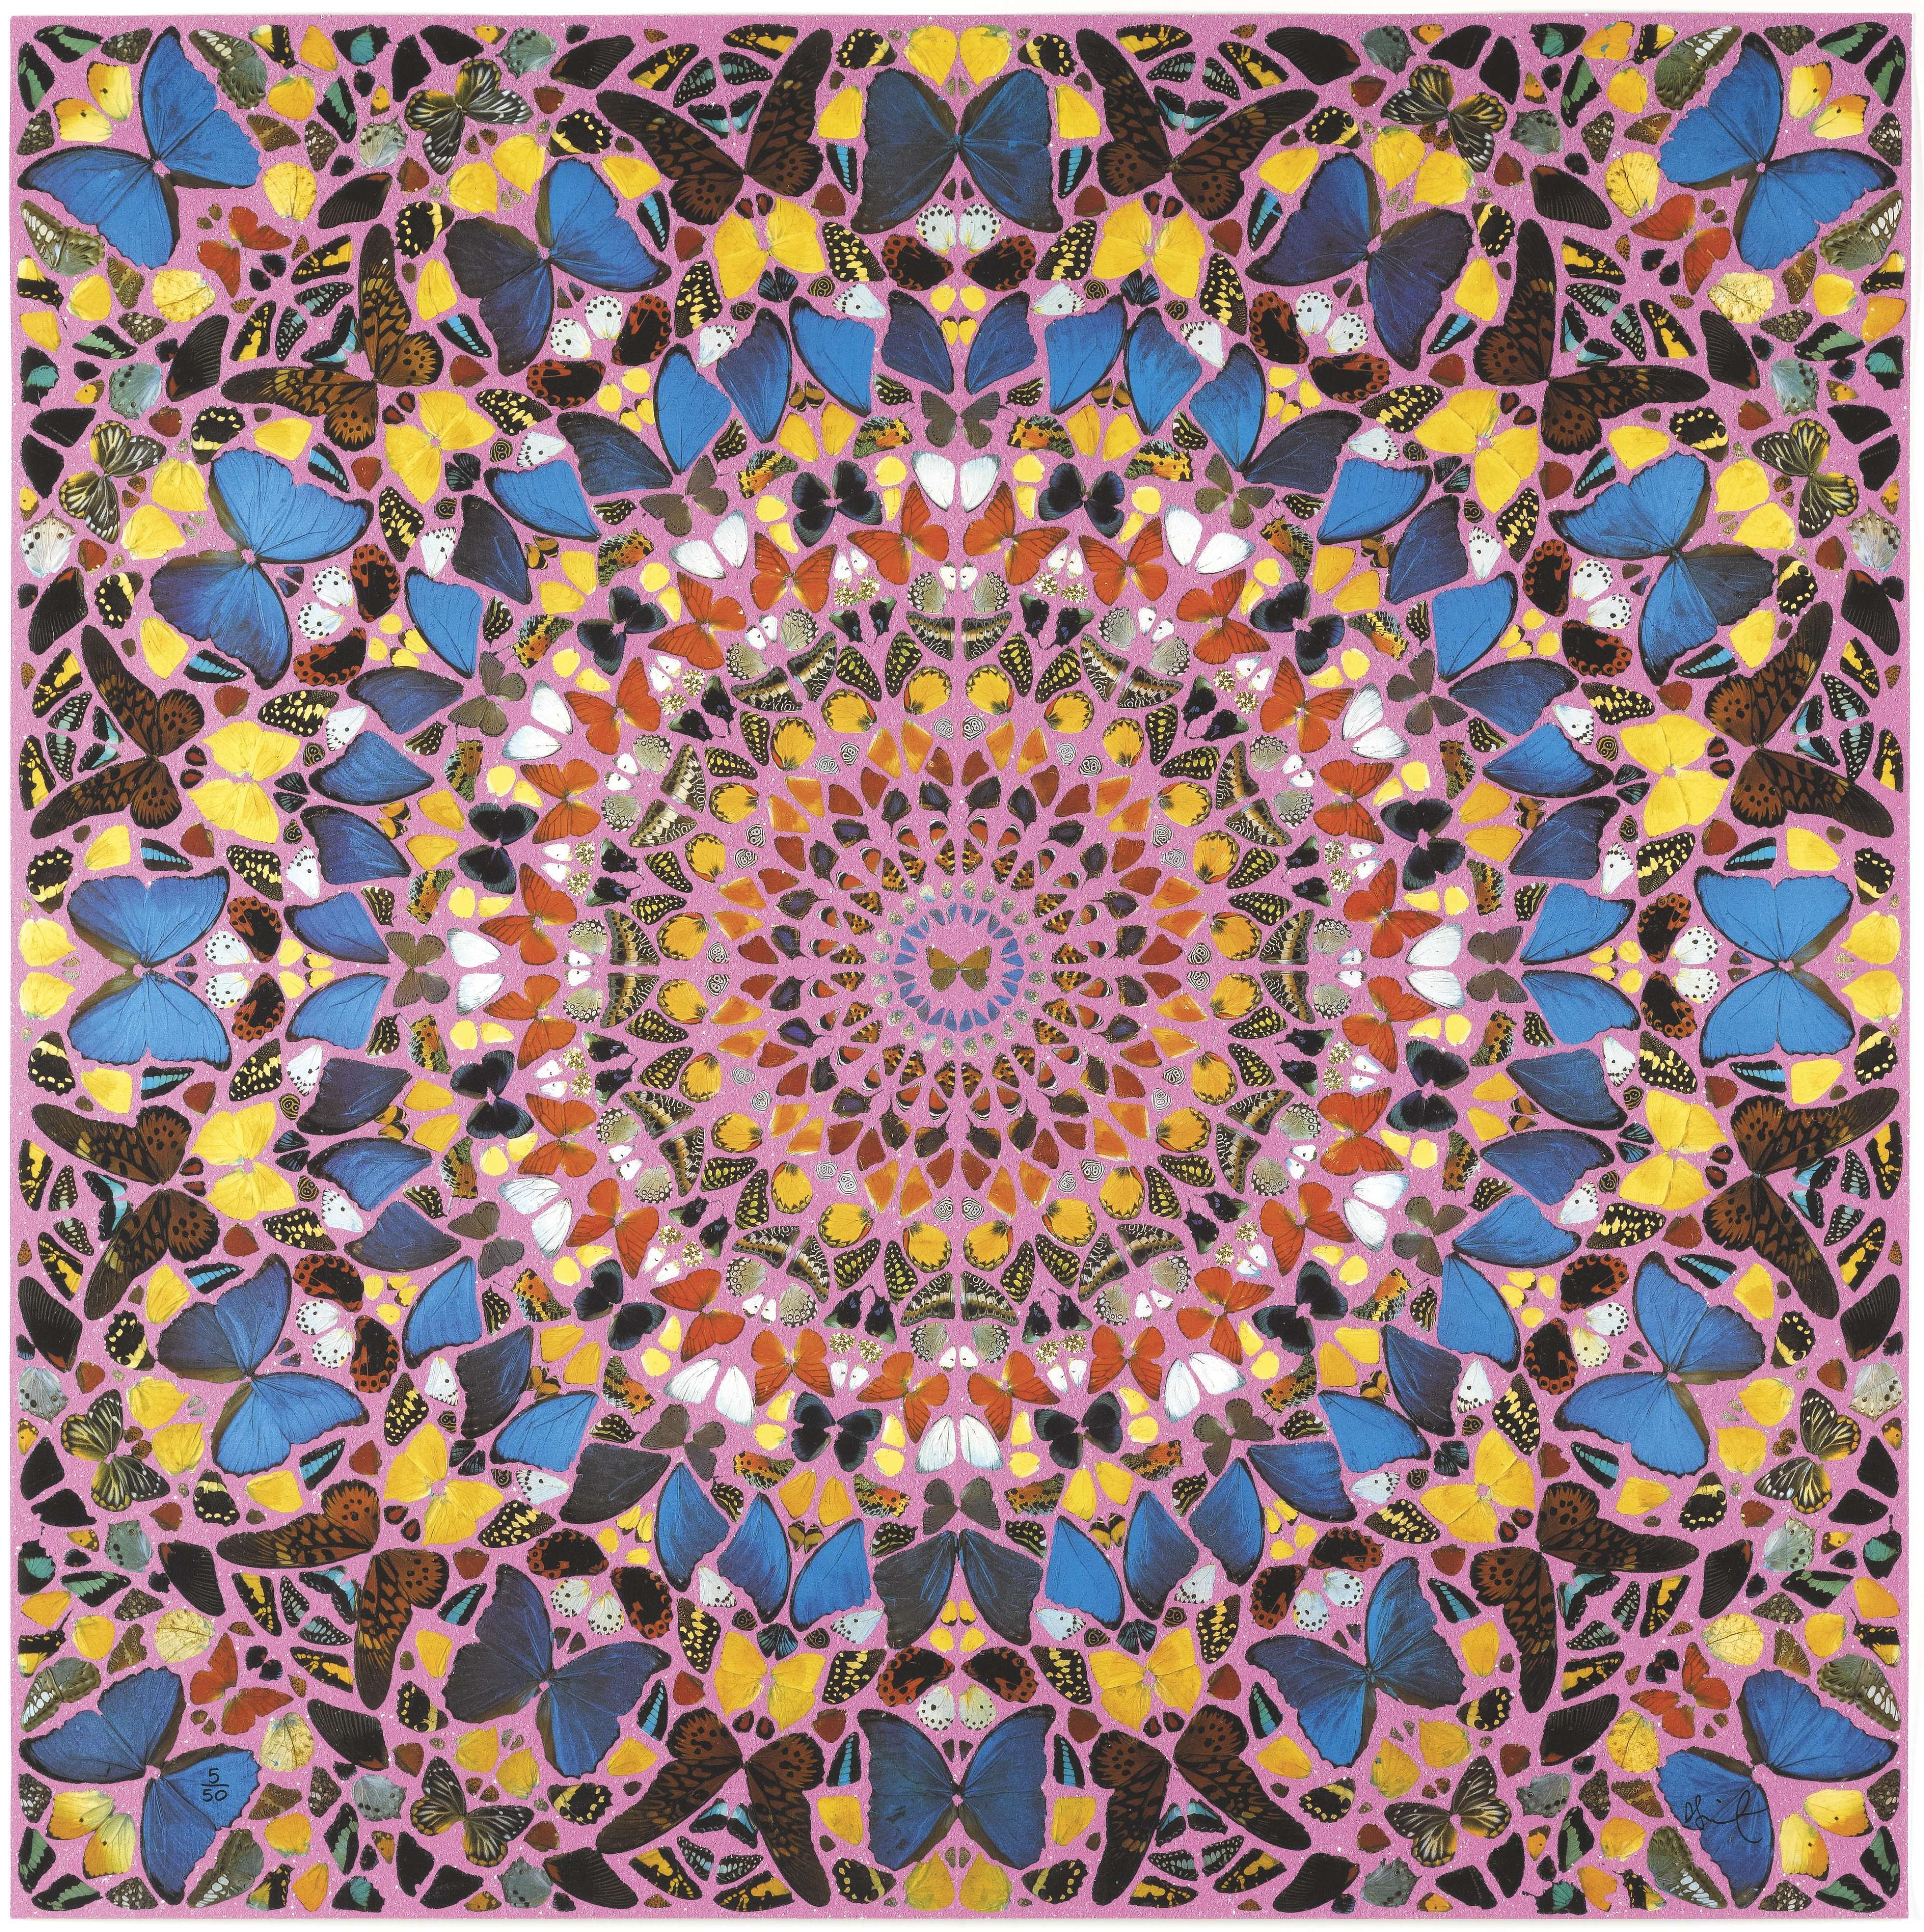 This print by Damien Hirst shows an intricate kaleidoscopic pattern made up of many varying butterfly wings. The print is depicted in an array of colours such as blue, yellow, purple, orange and red and the geometric composition is made up of concentric circles.